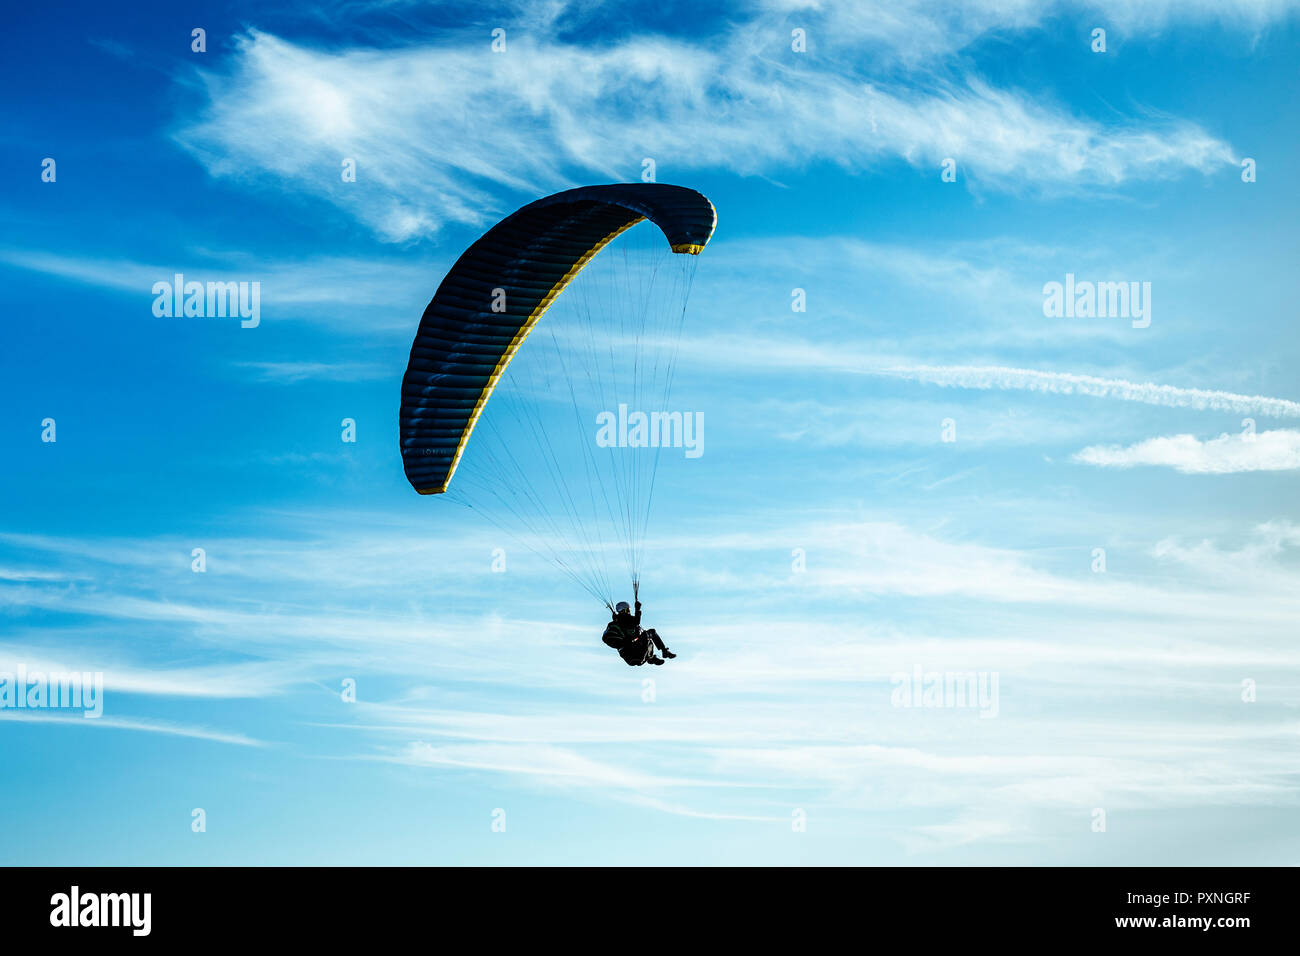 Paragliding, paraglider, blue sky with clouds Stock Photo